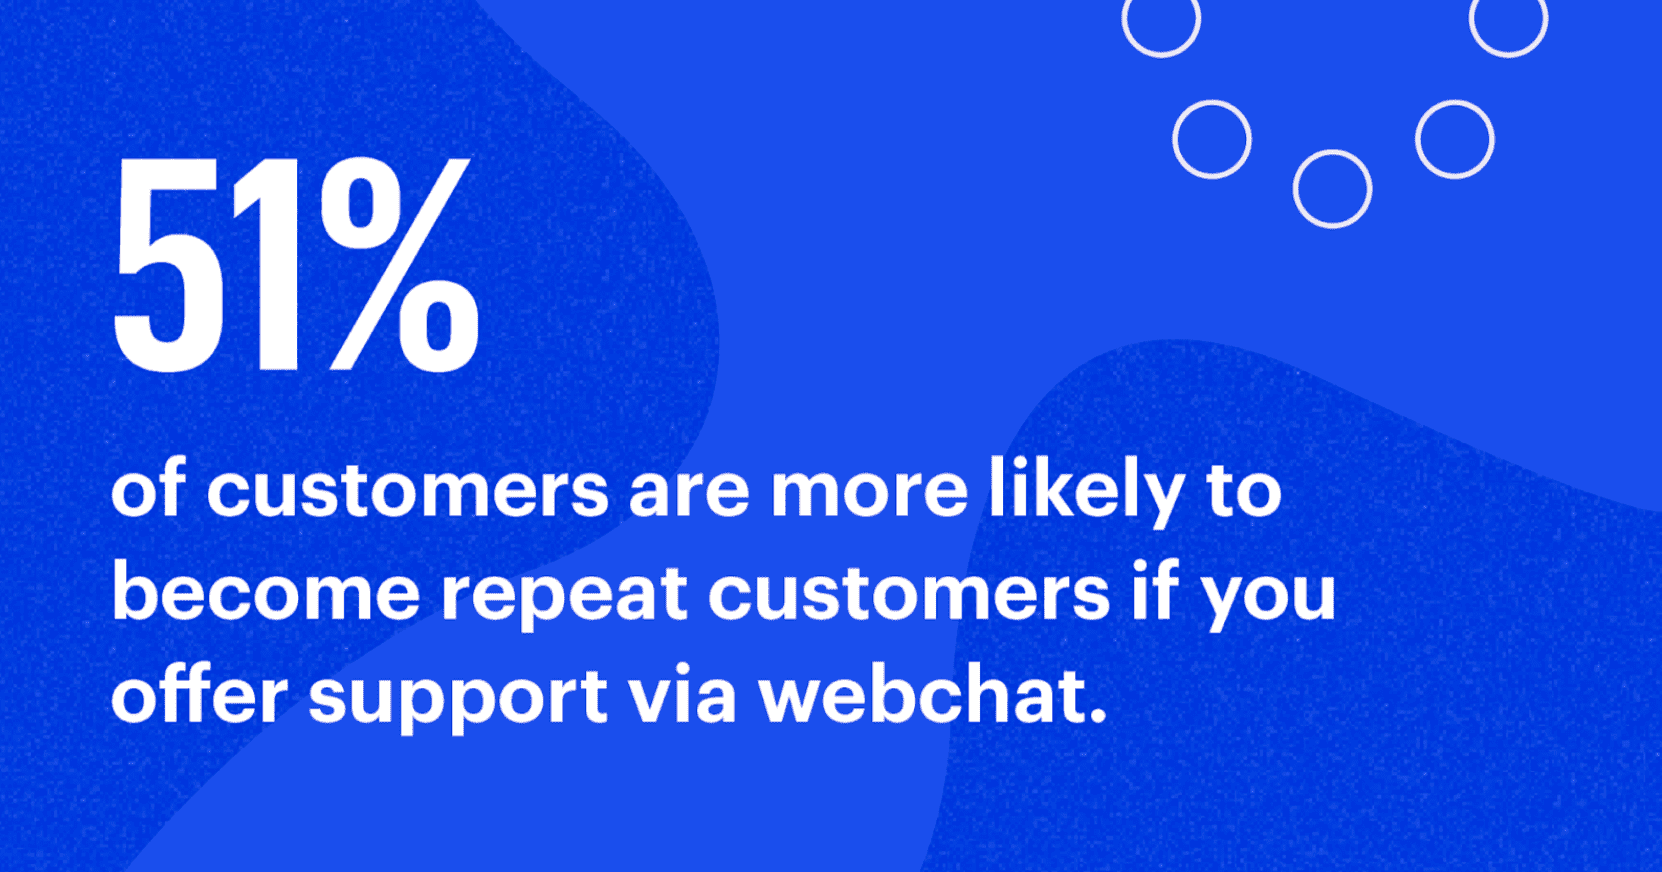 51% of customers will come back if you use webcat